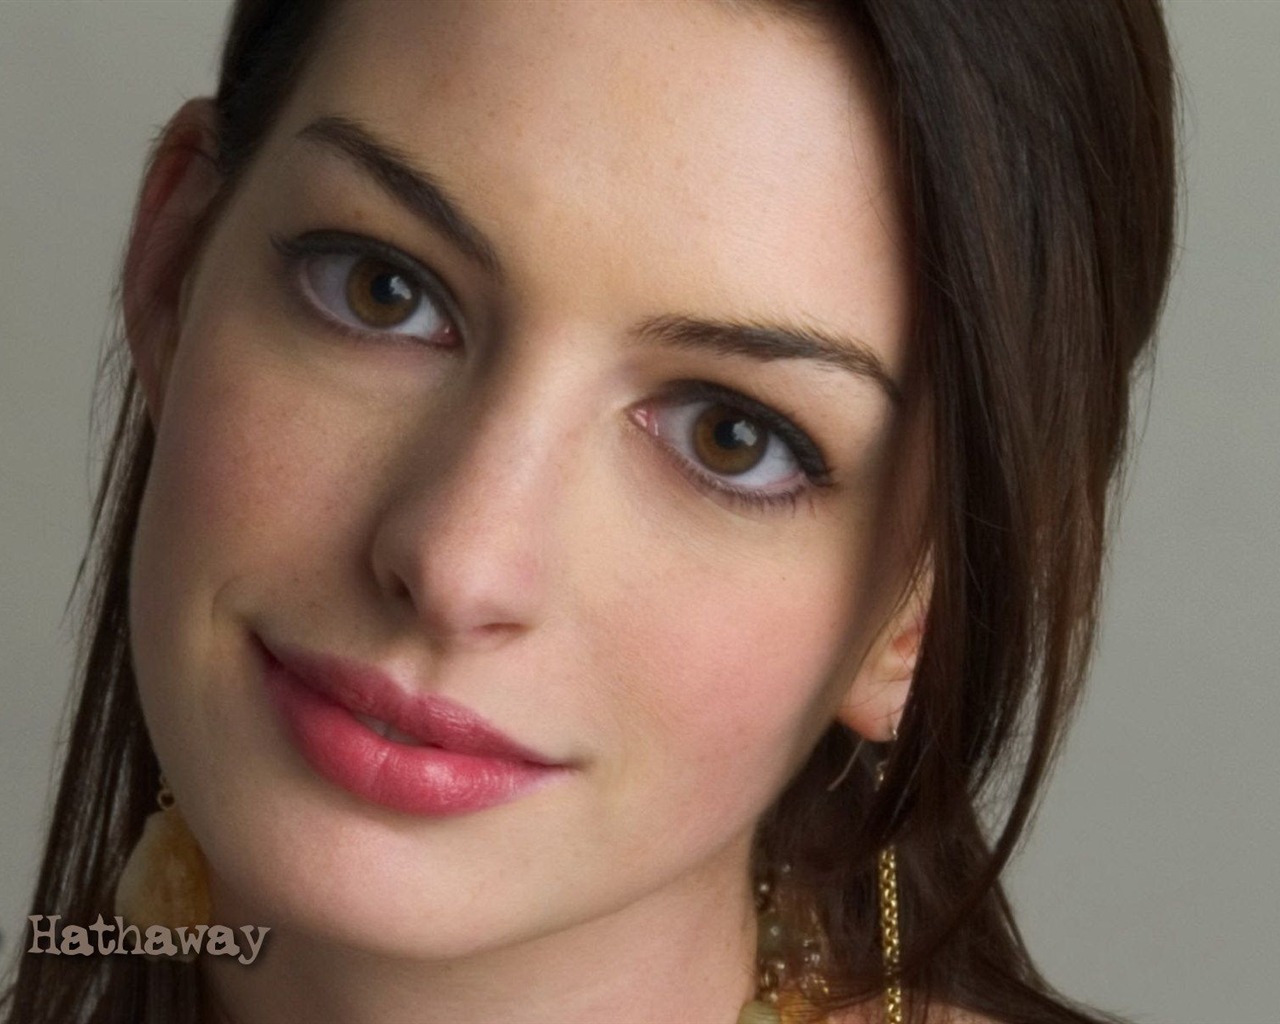 Anne Hathaway #042 - 1280x1024 Wallpapers Pictures Photos Images